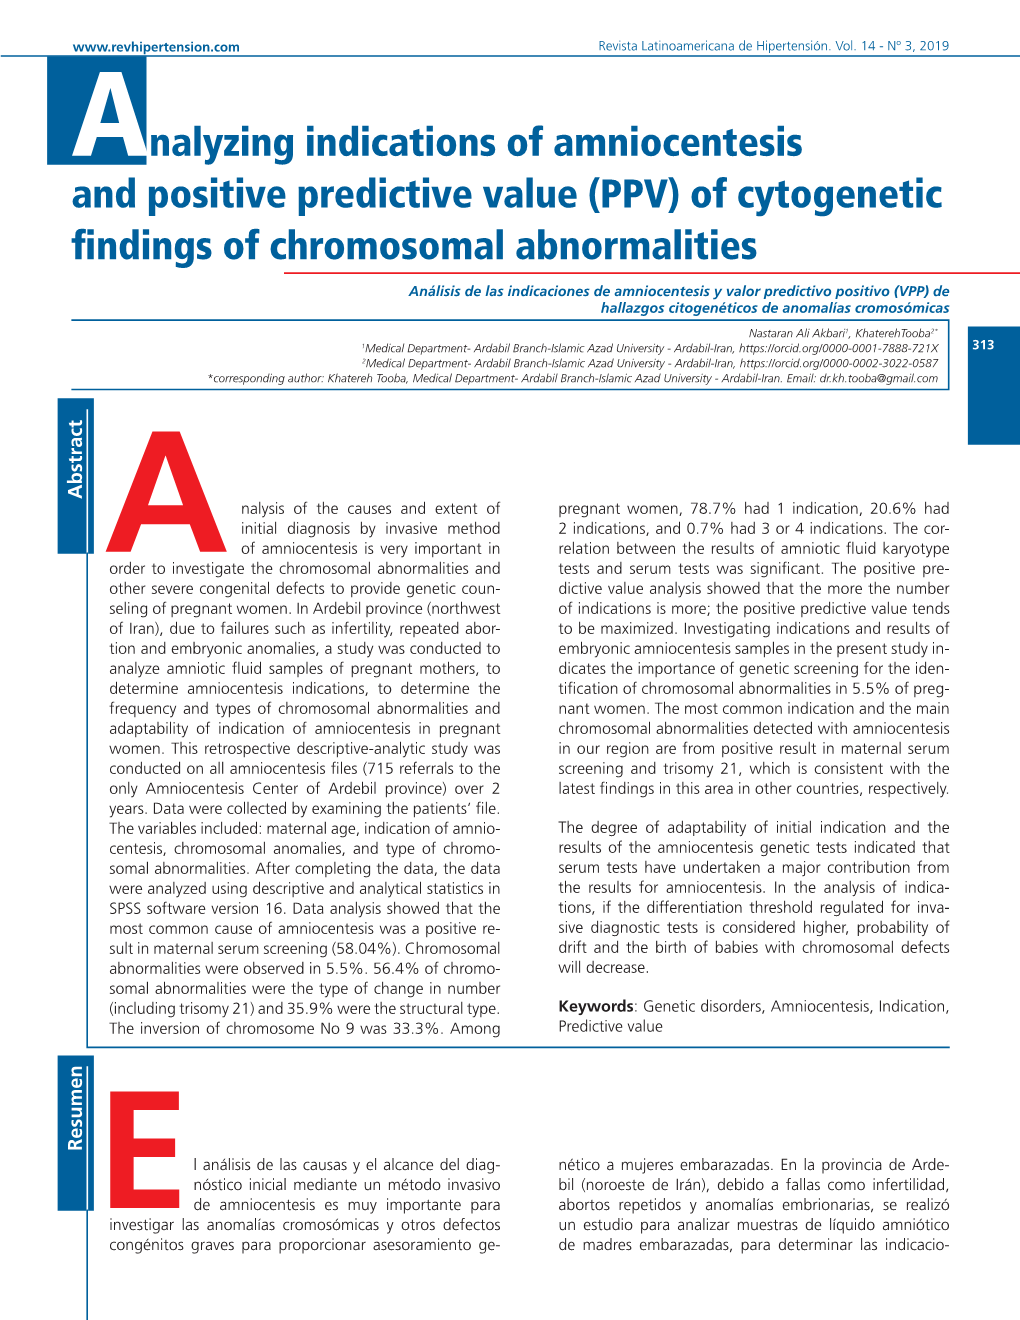 Analyzing Indications of Amniocentesis and Positive Predictive Value (PPV) of Cytogenetic Findings of Chromosomal Abnormalities